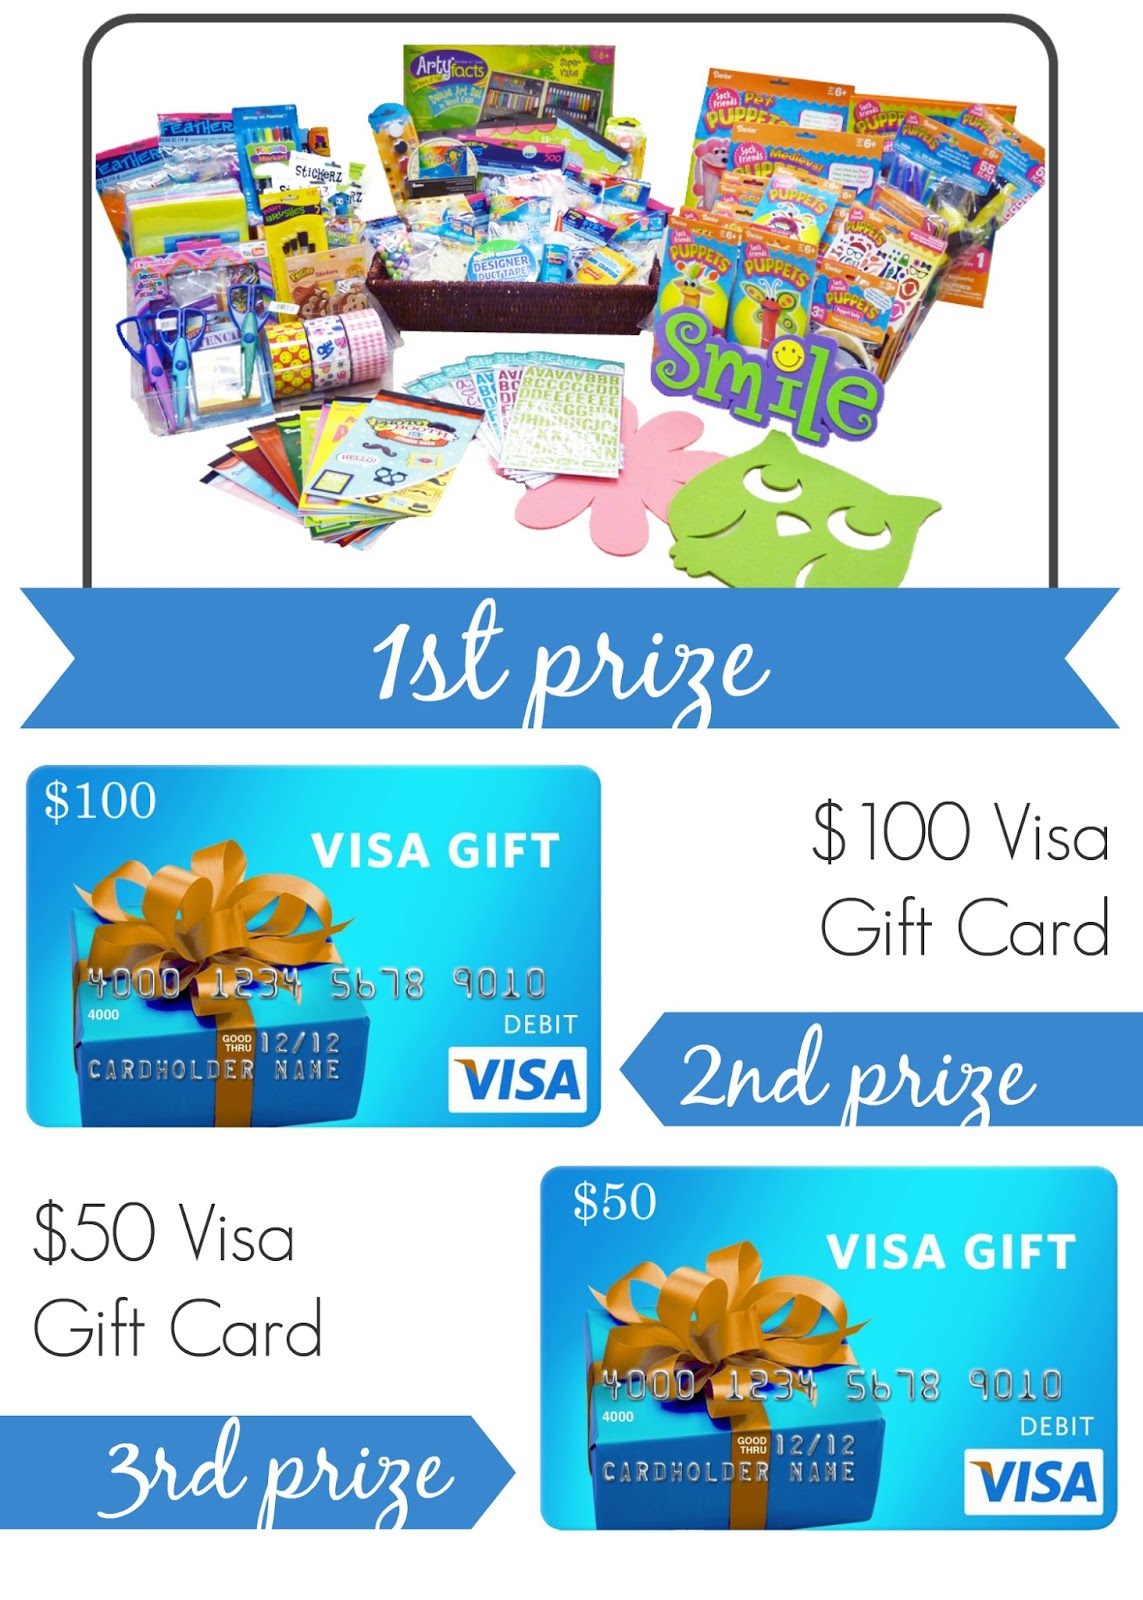 WIN over $300 in Crafting Supplies or a Gift Card! | #kidscrafts #foamies #spon http://goo.gl/mZeblu